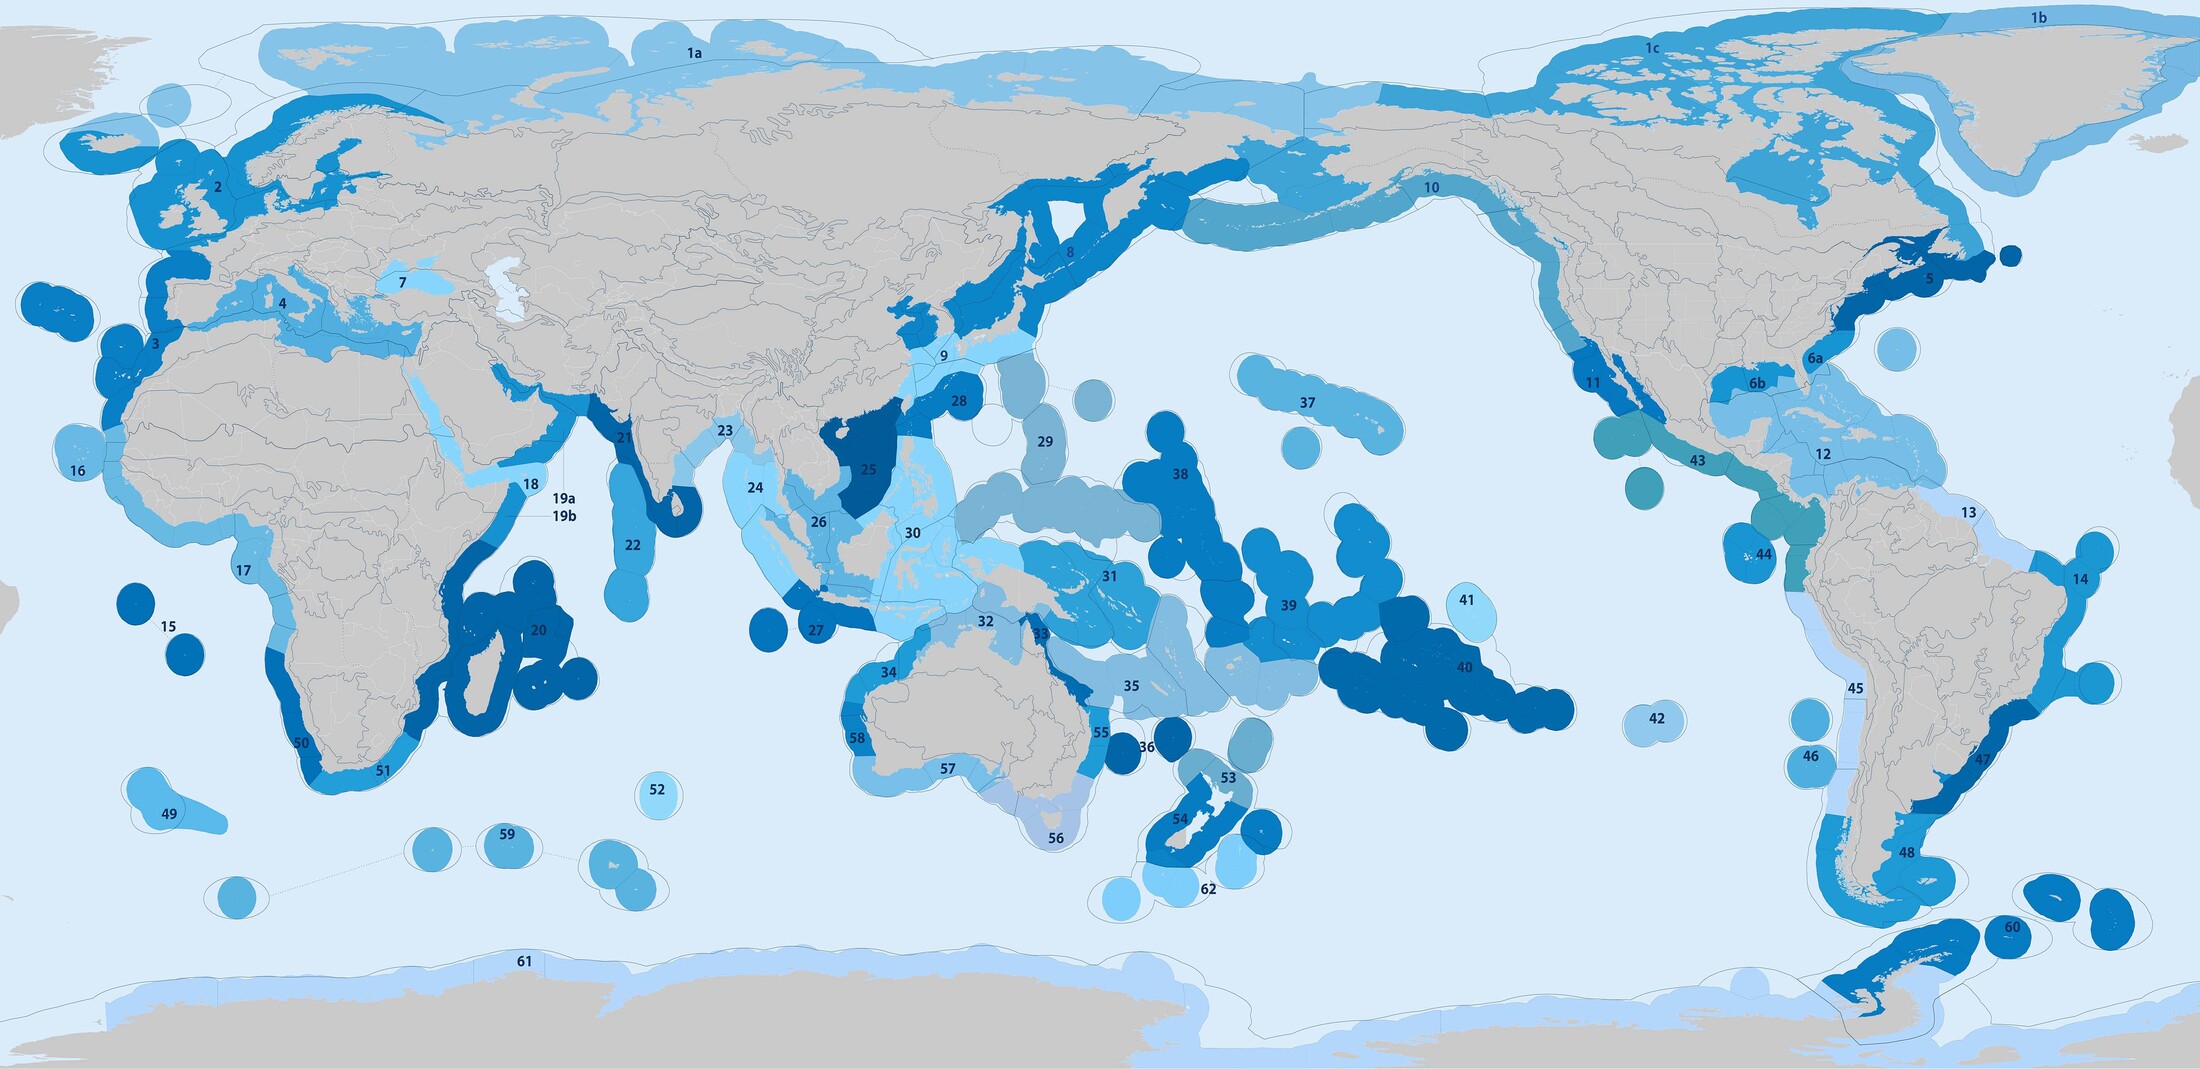 The 62 marine provinces from “Marine Ecoregions of the World” (Spalding et al. 2007) overlayed with Bioregions 2023 polygons.